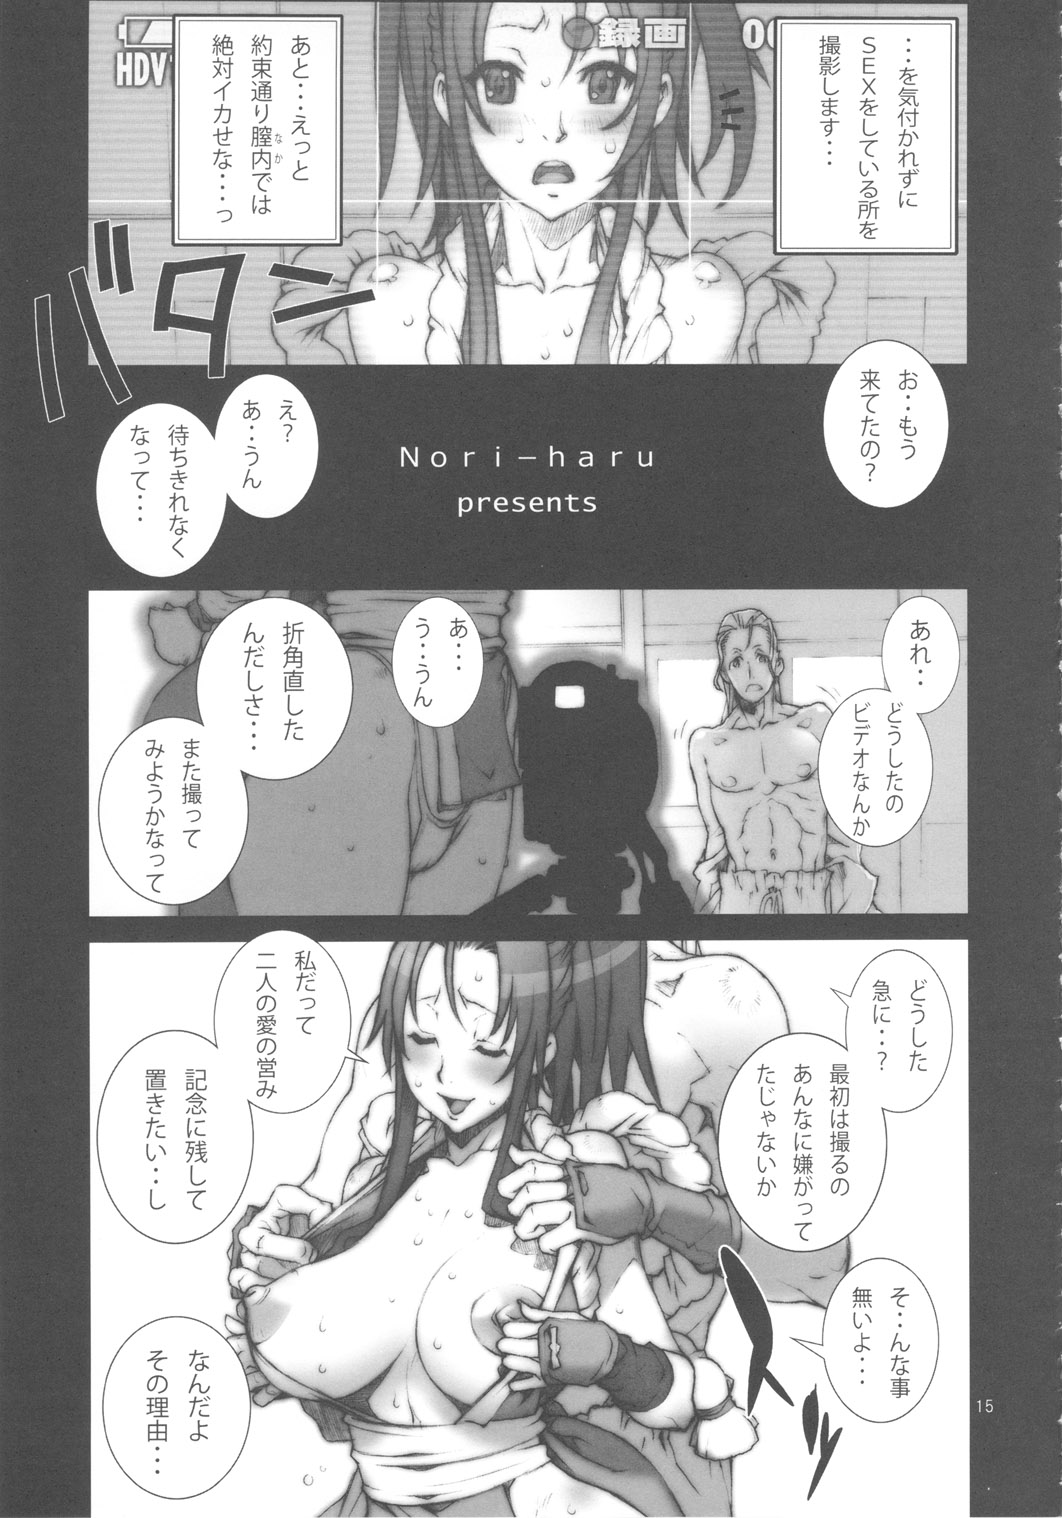 [P-Collection] Mai! Sanjyou! Hagoku no Syou (King of Fighters) page 16 full